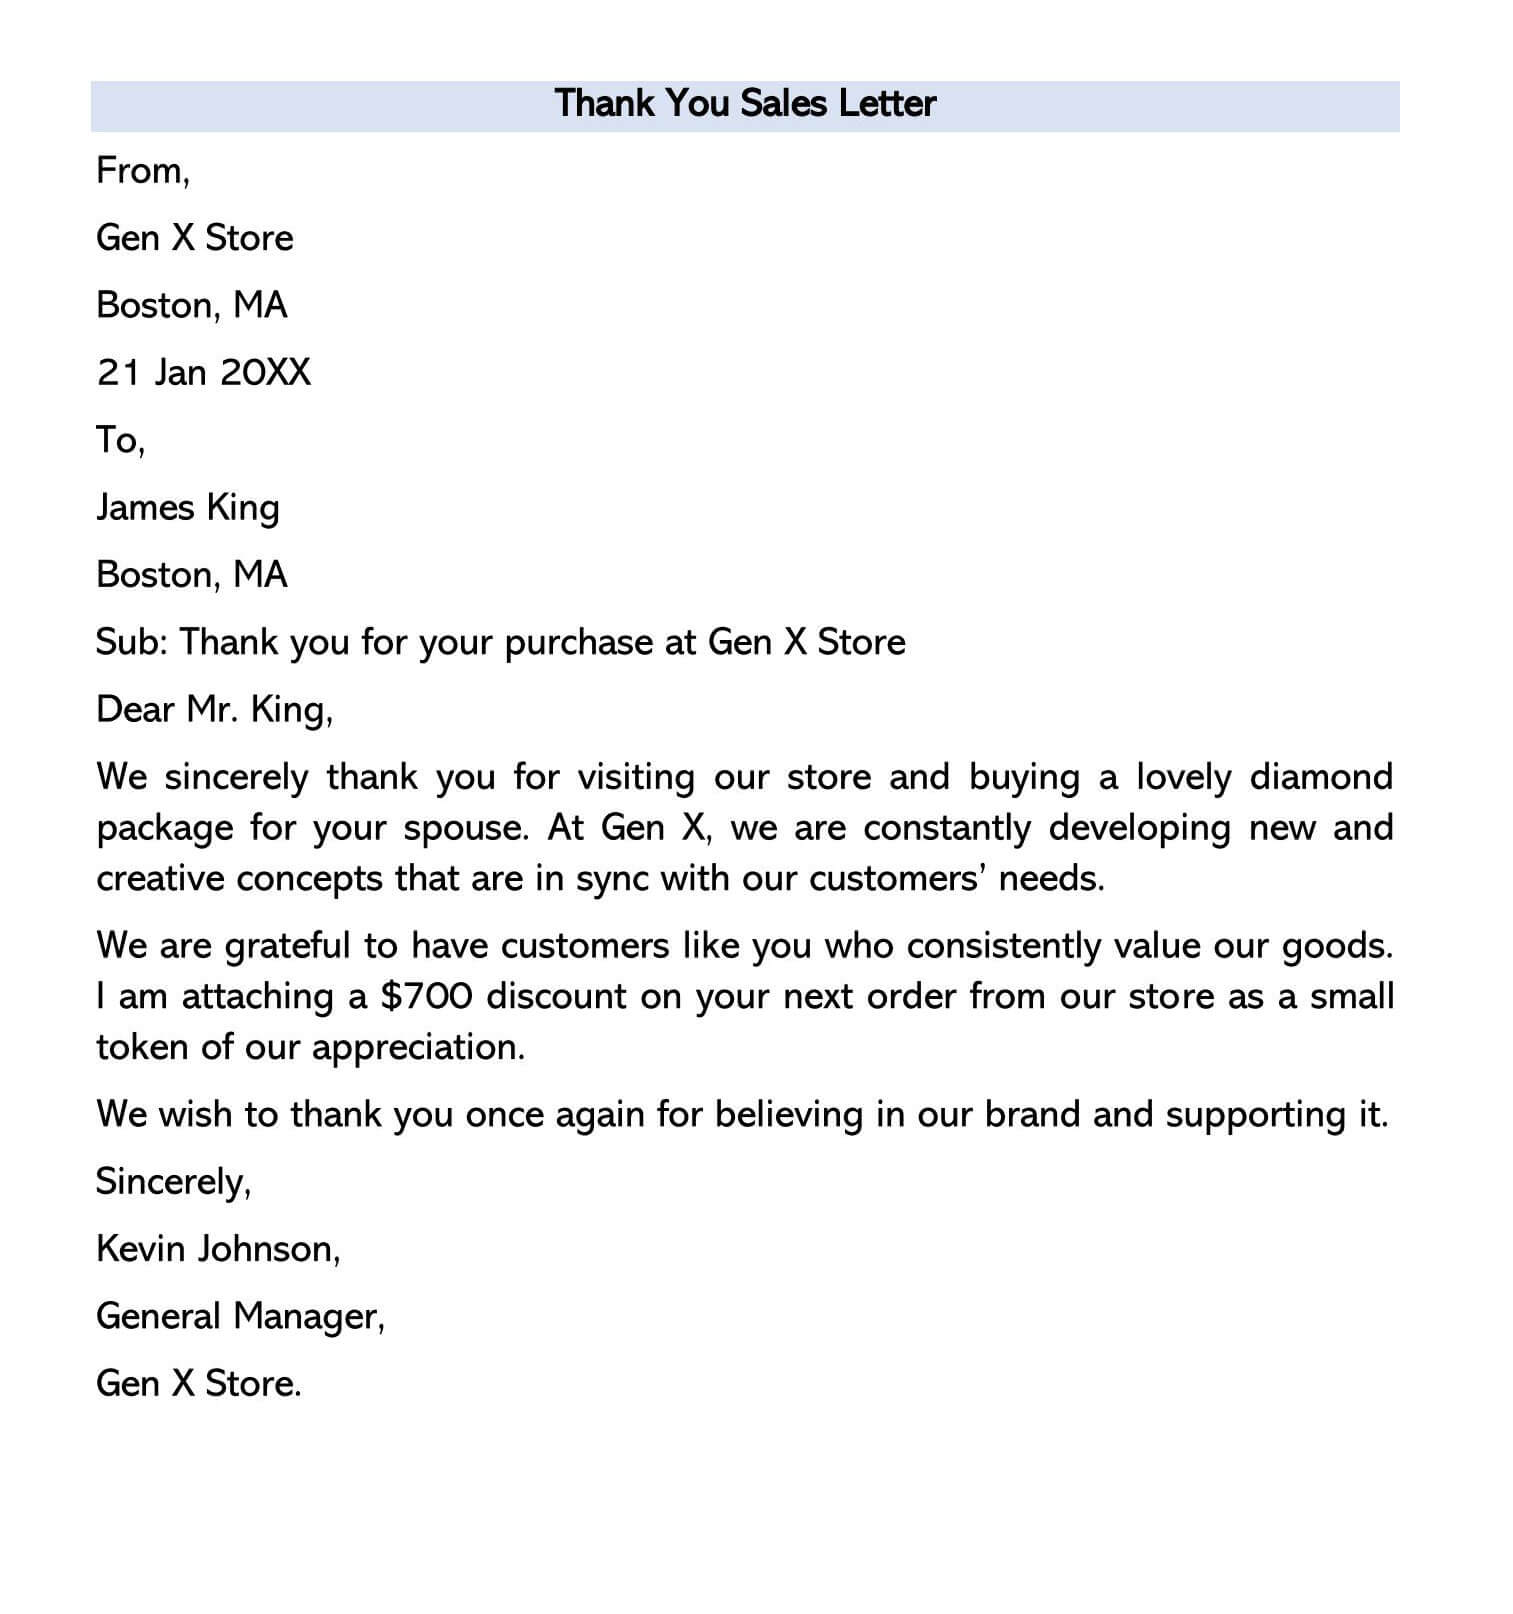 Emulate Powerful Proven Sales Letters Web Sales Letters Supreme FREE SHIP 